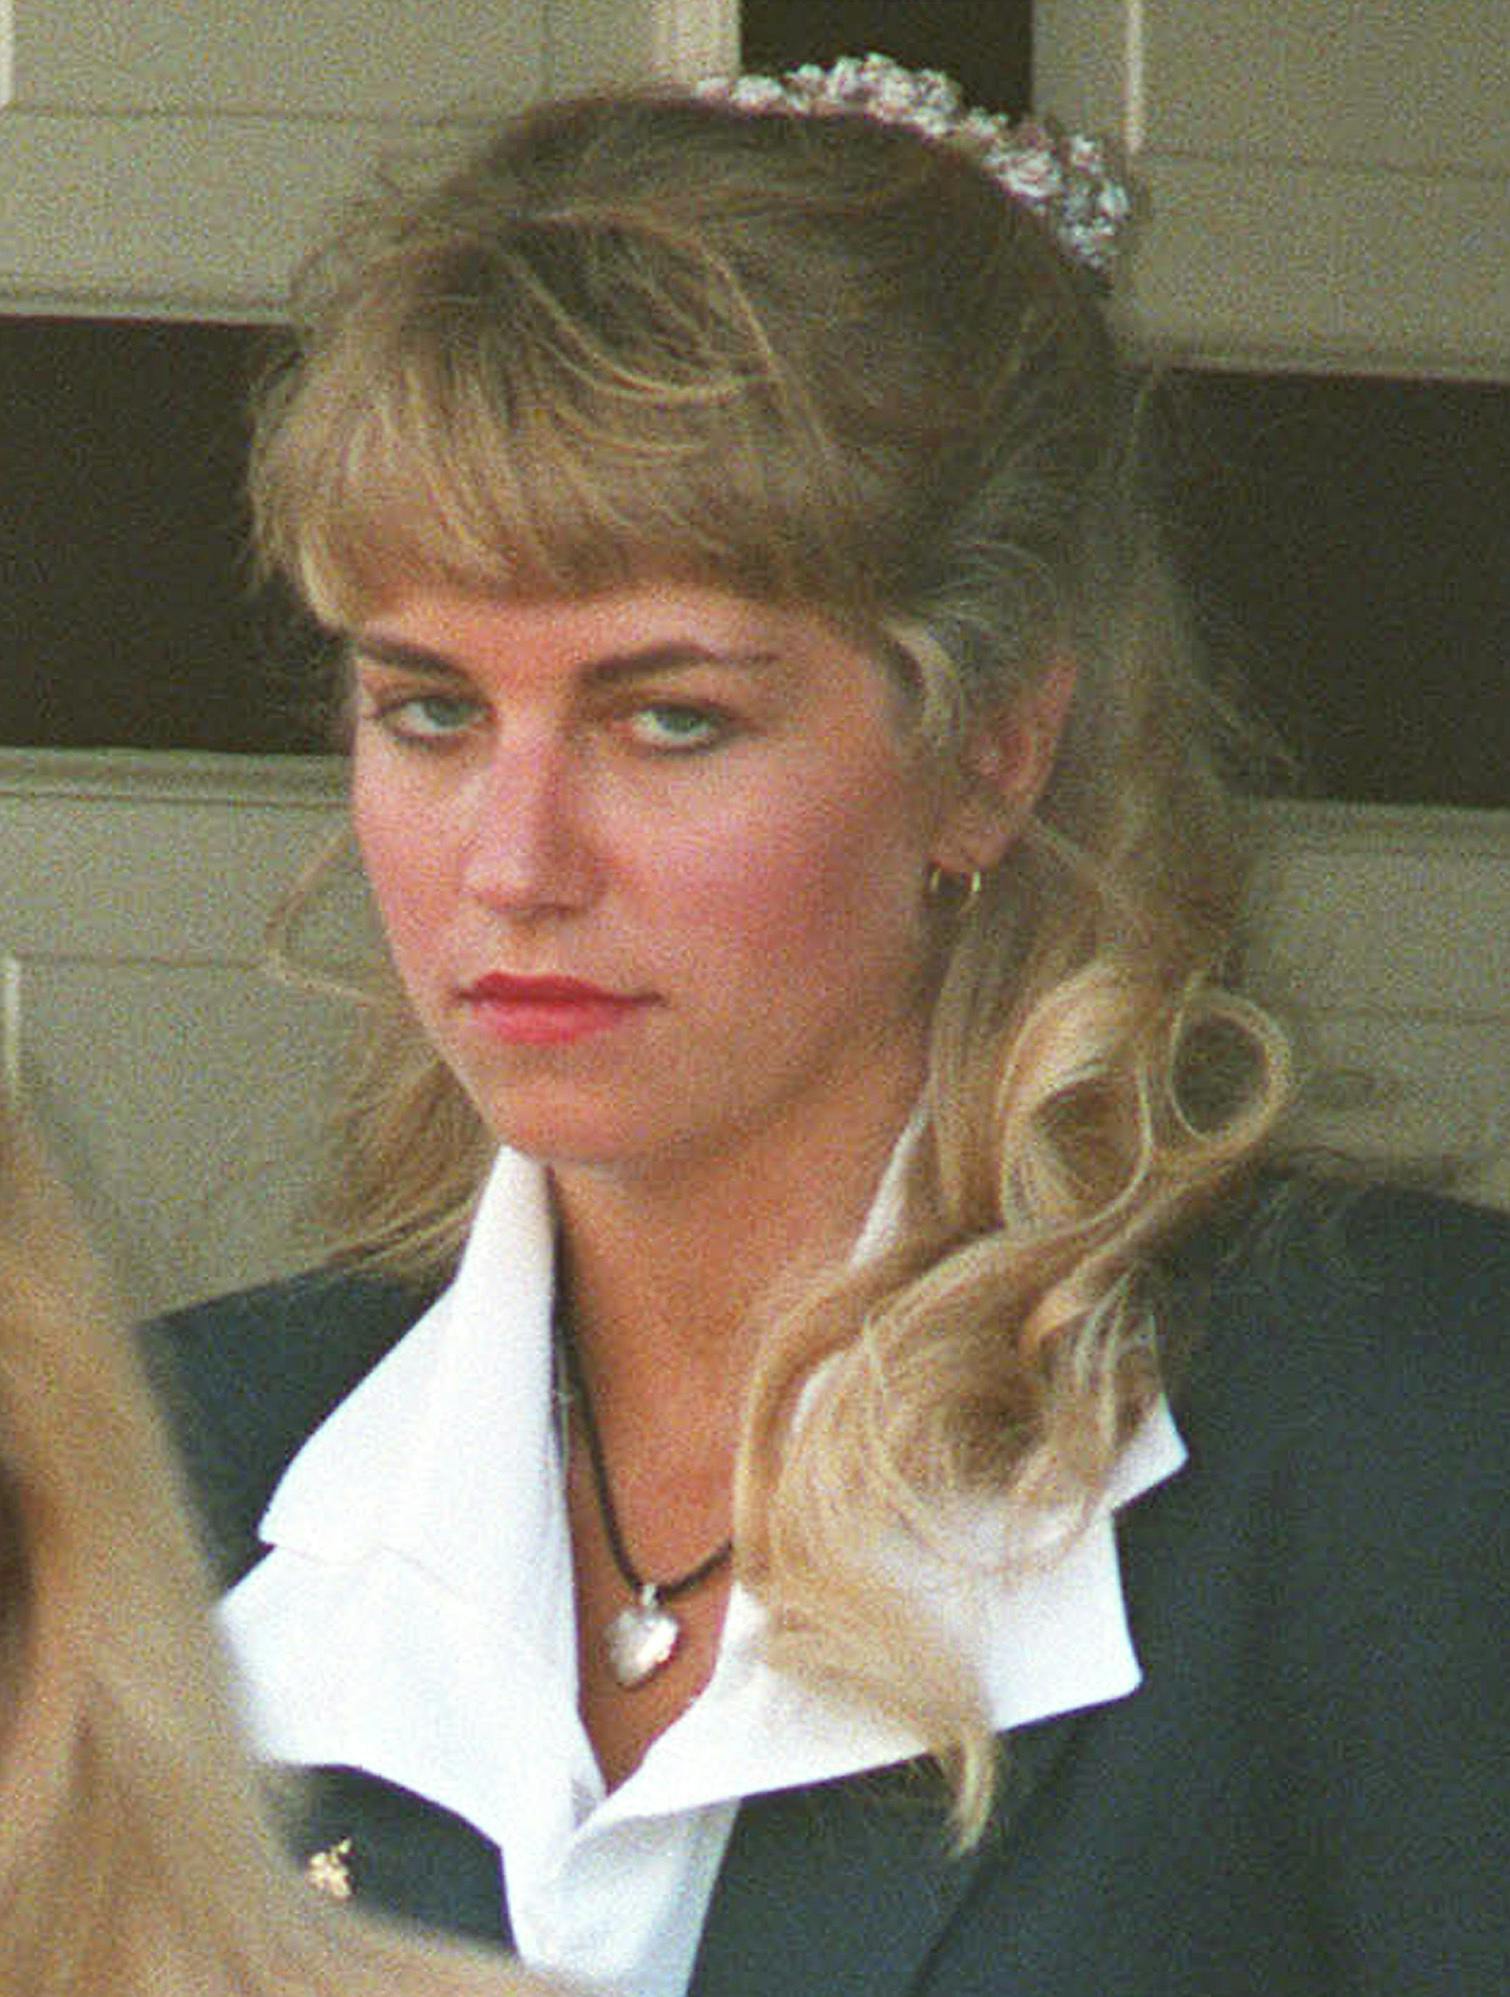 ** FILE ** Karla Homolka leaves her family home in St. Catharines, Ont., in this July 6, 1993 file photo. Homolka, the most reviled woman in Canada is set to walk out of prison Monday, July 4, 2005, after serving 12 years for the rapes and murders of teenage girls, including her younger sister. (Frank Gunn/The Canadian Press via AP)